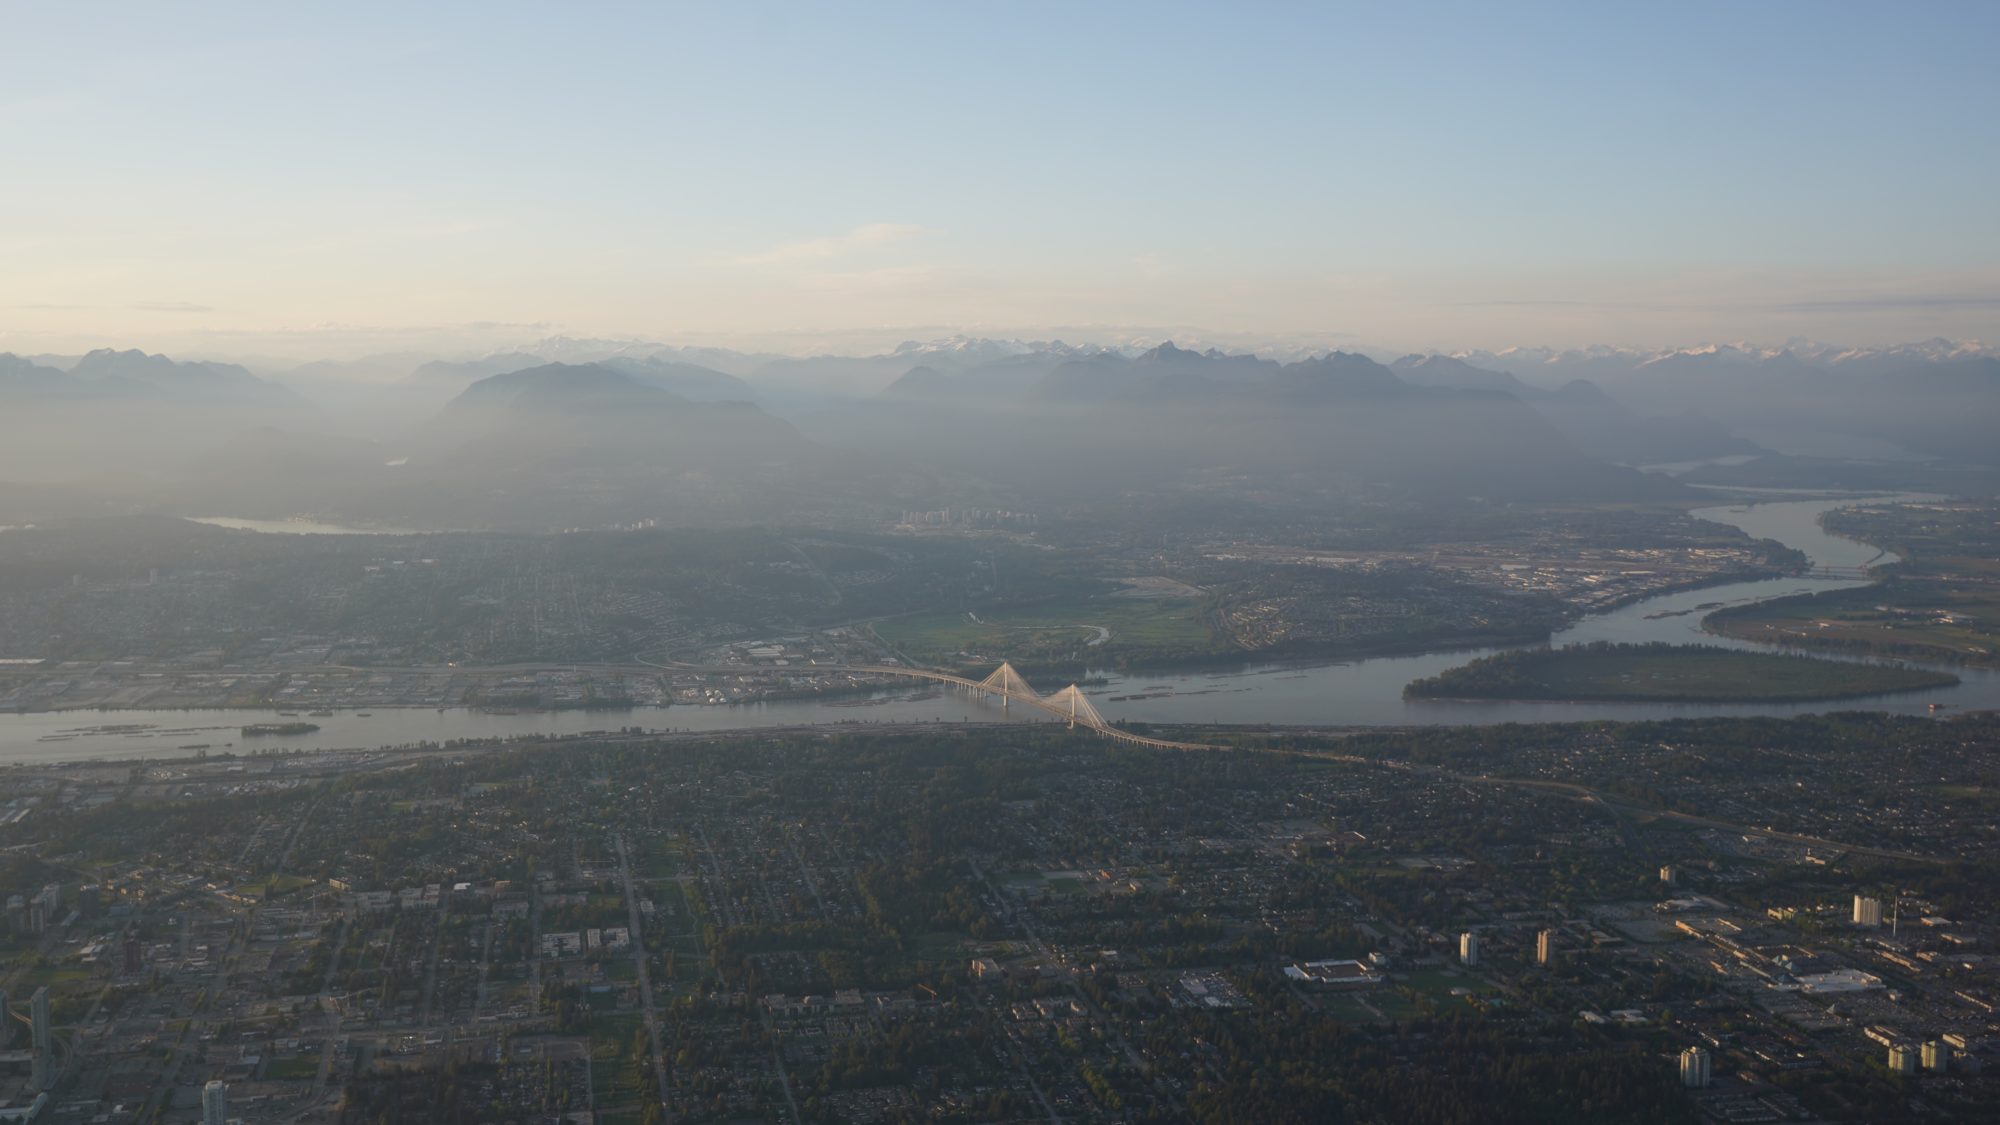 A view of the Fraser River, with mountains as backdrop